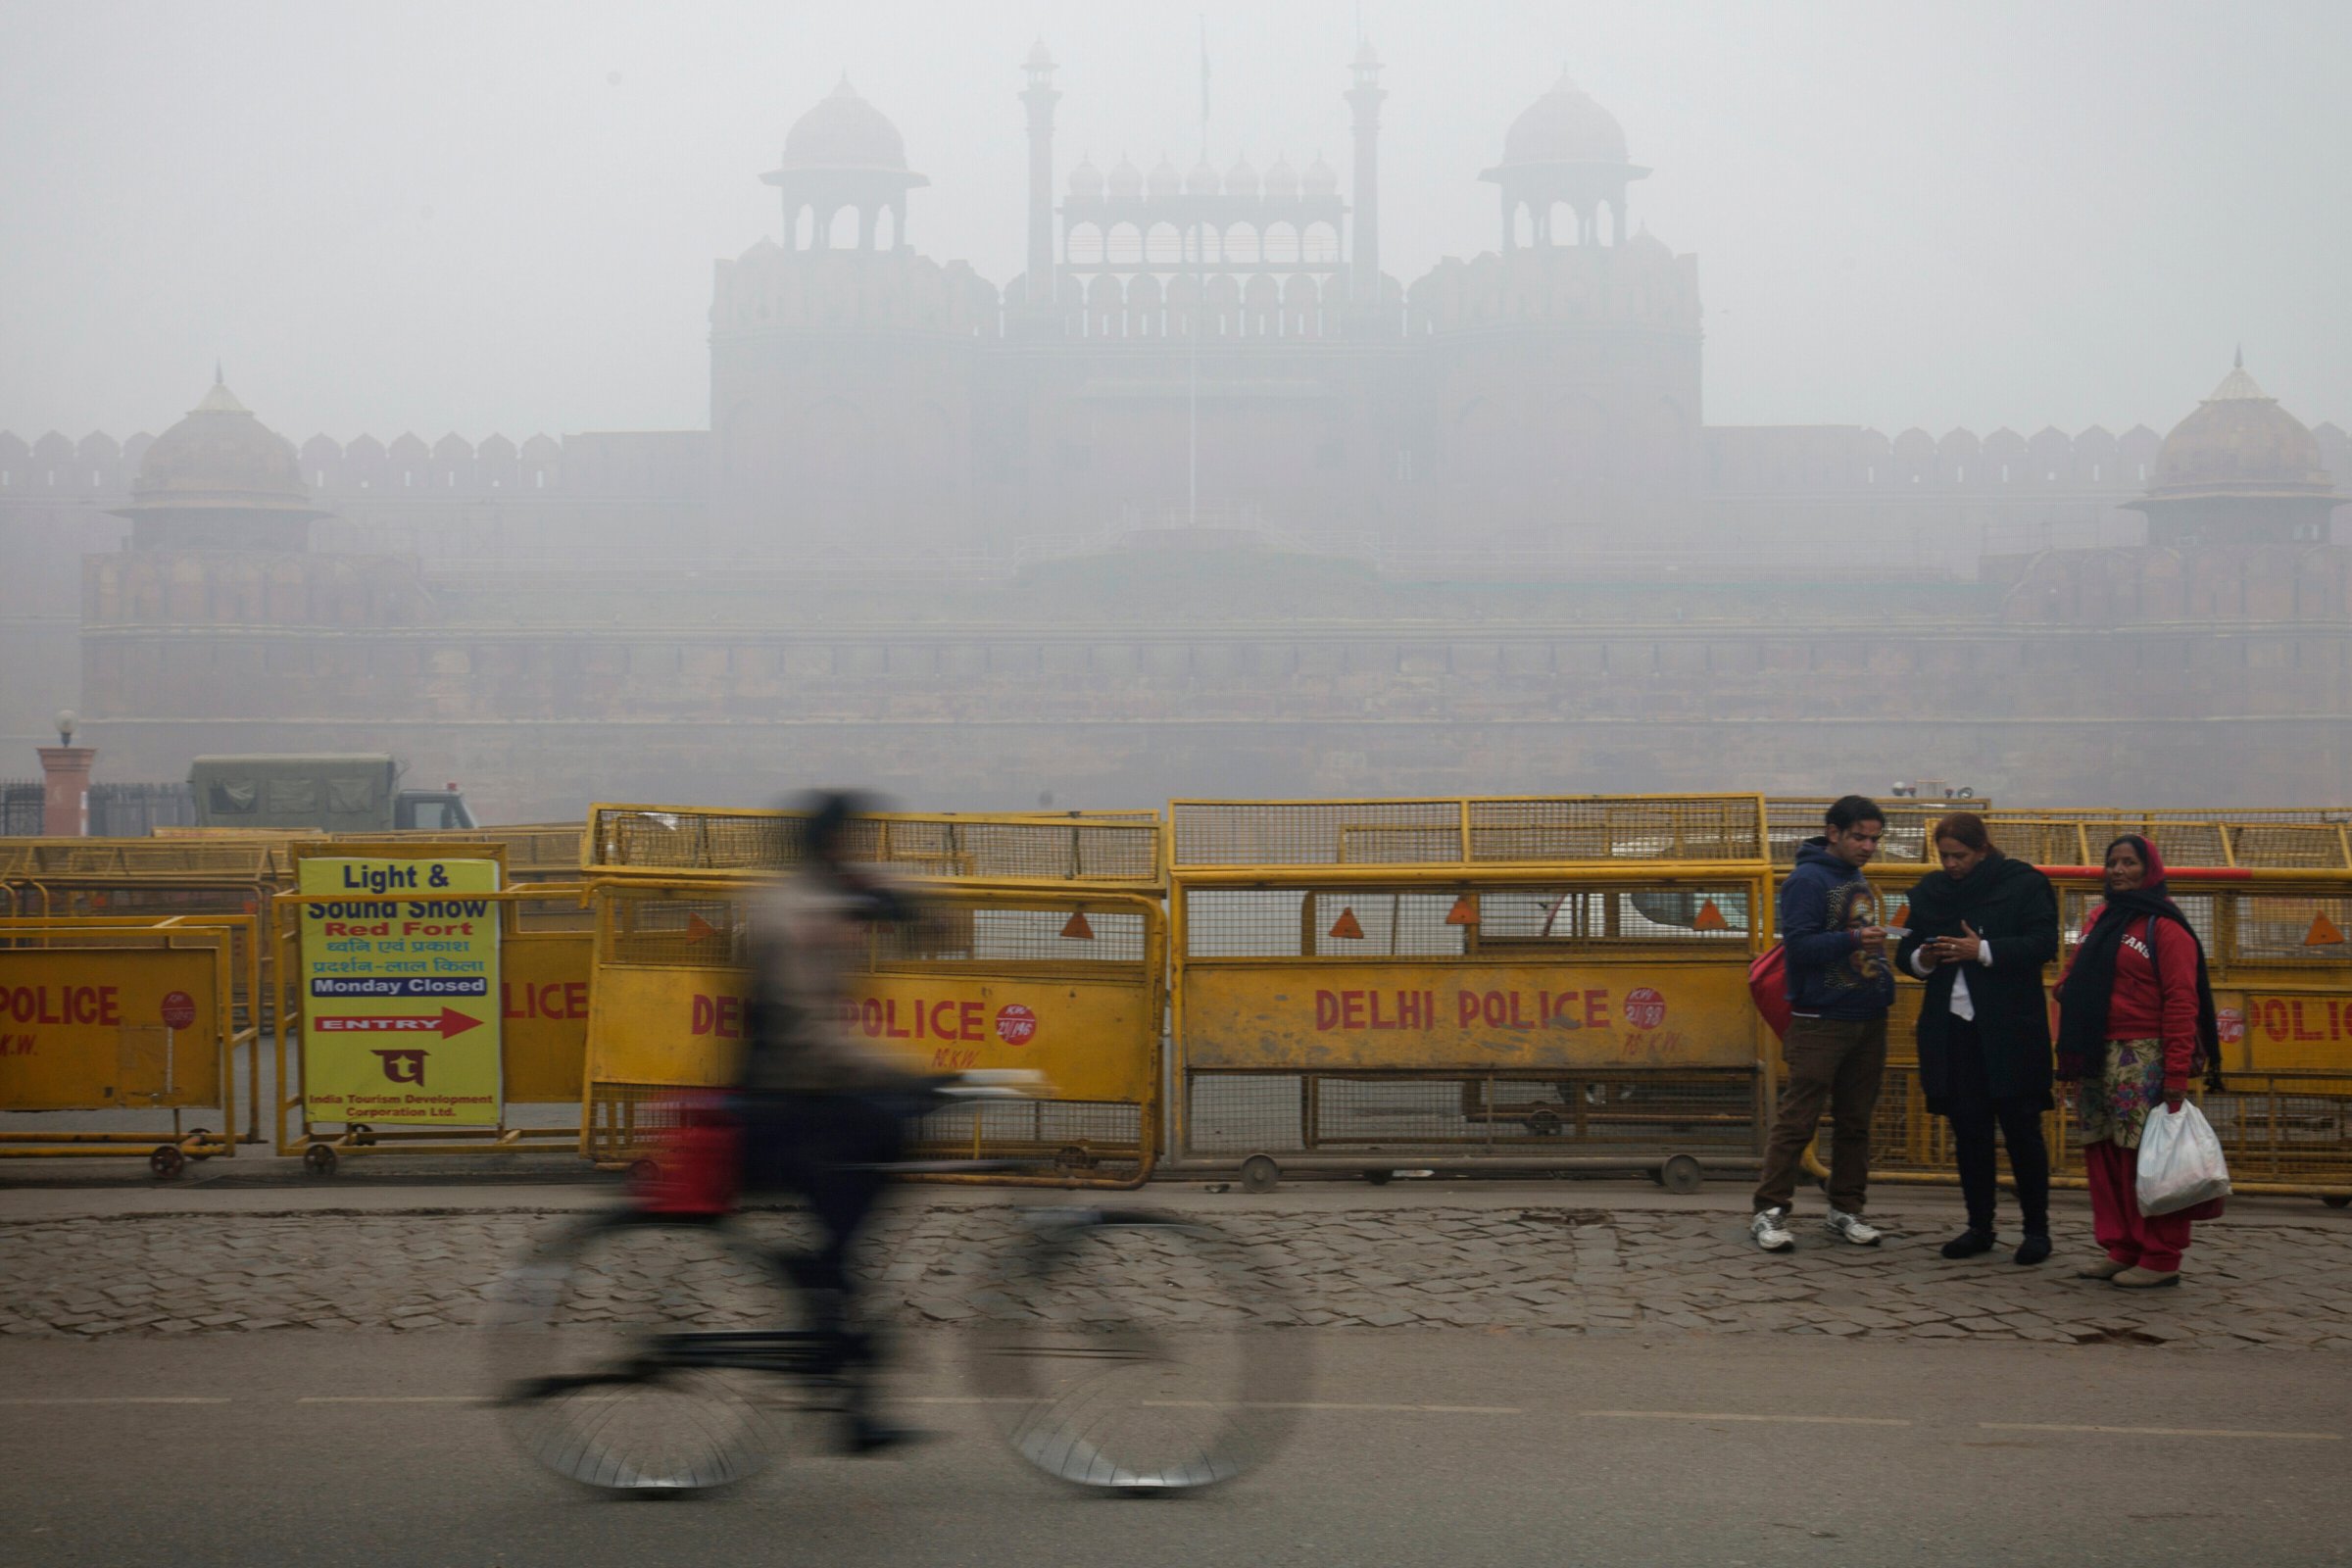 The Red Fort is covered by haze mainly caused by air pollution in Delhi, India on January 20, 2014. Air pollution in India exceeds that of China as diesel fuel subsidies encourage ownership of polluting vehicles. (Kuni Takahashi/Bloomberg)